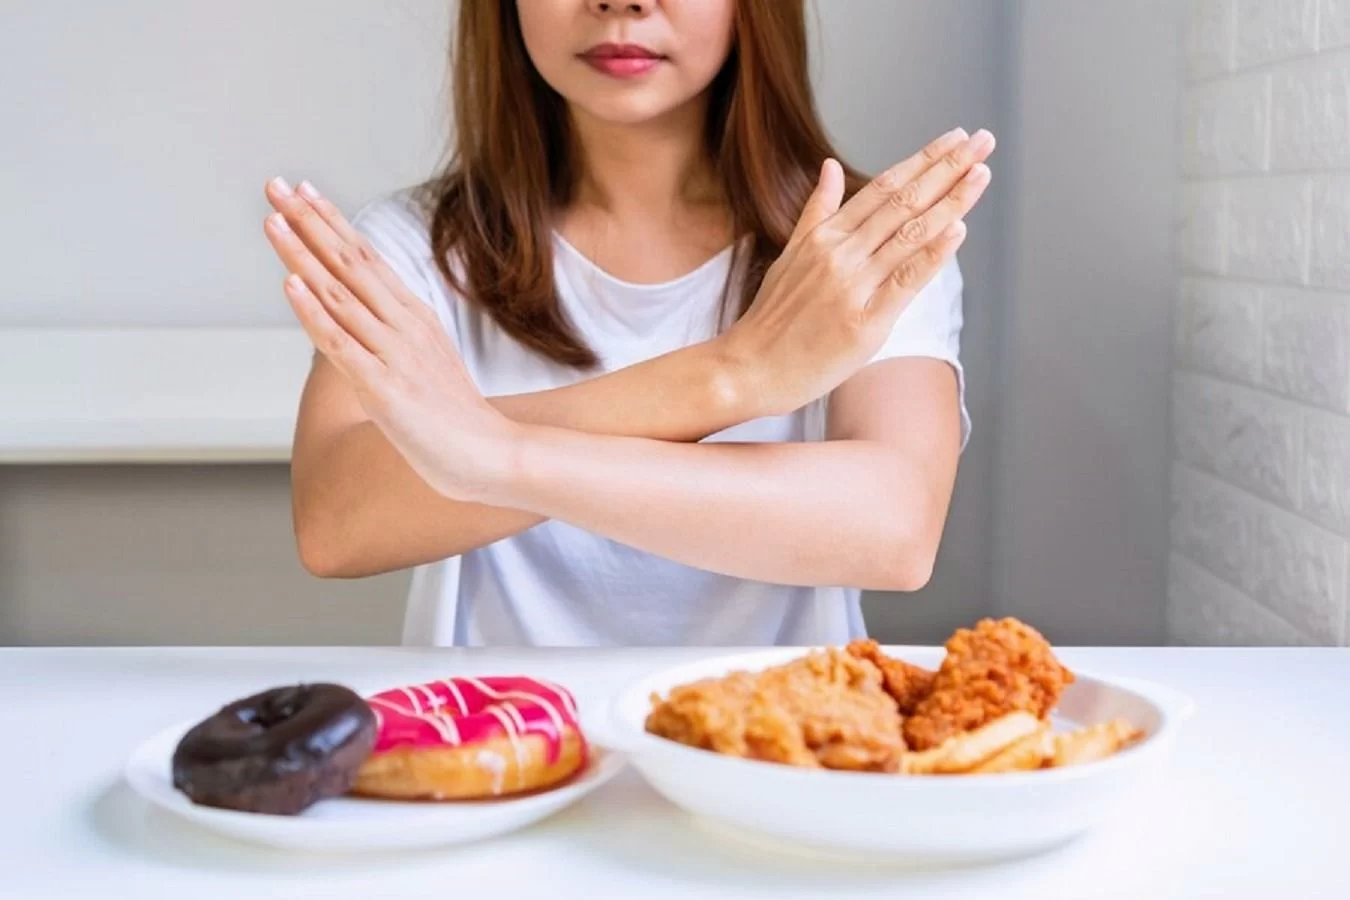 5 Foods to Avoid With Trulicity